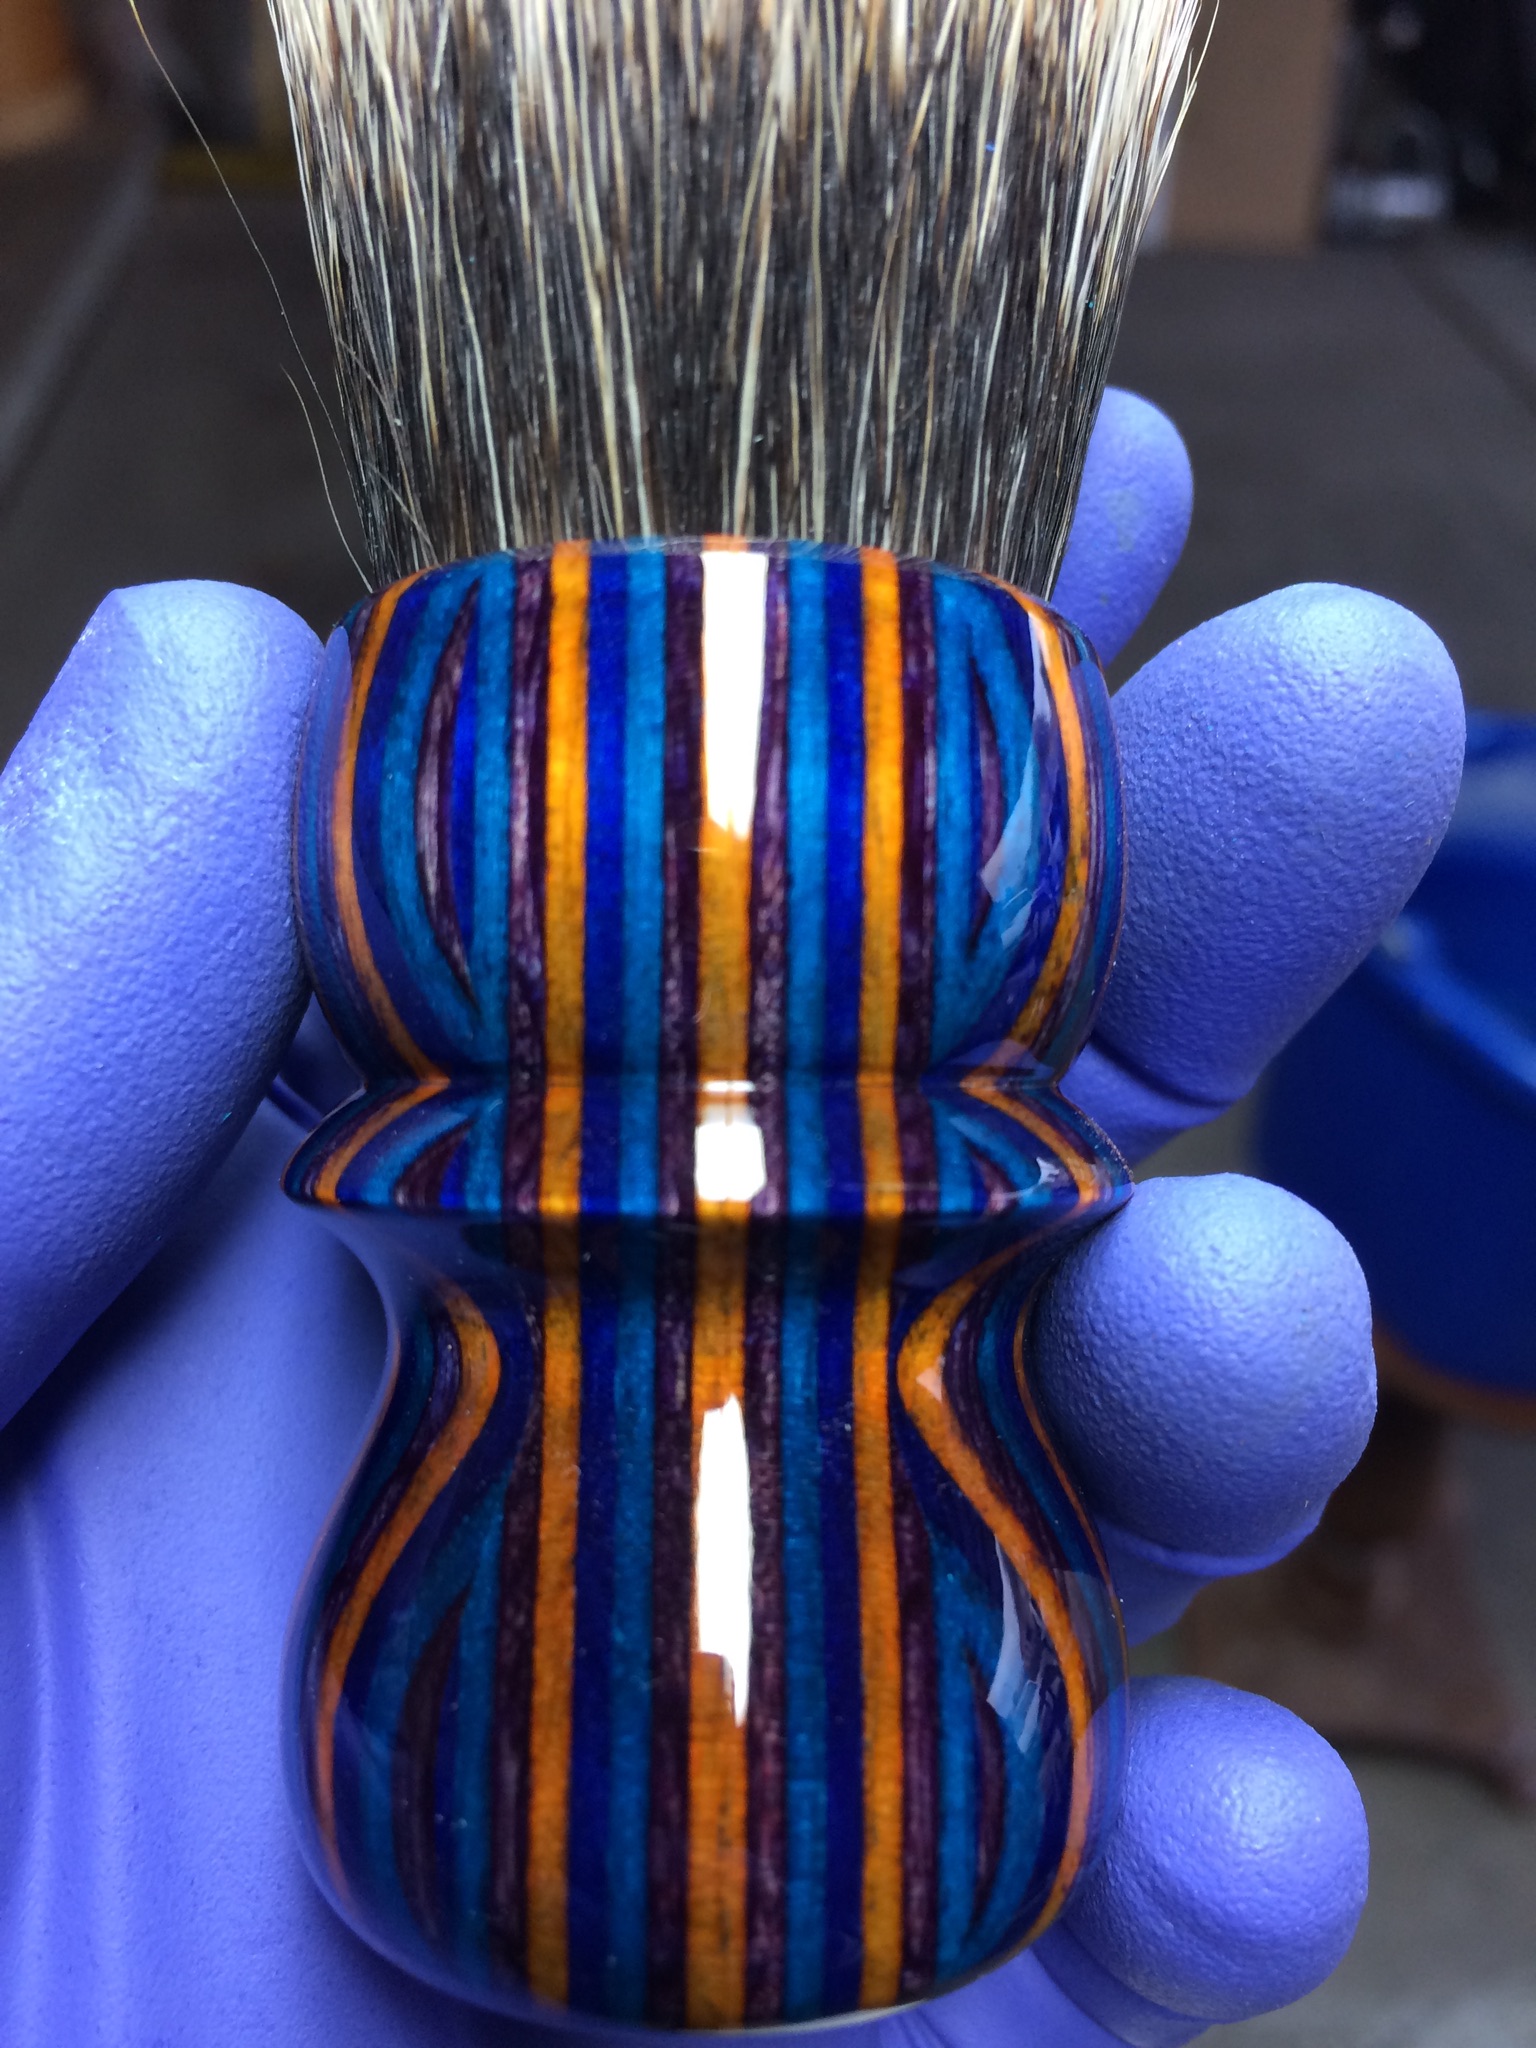 Modified spectraply brush